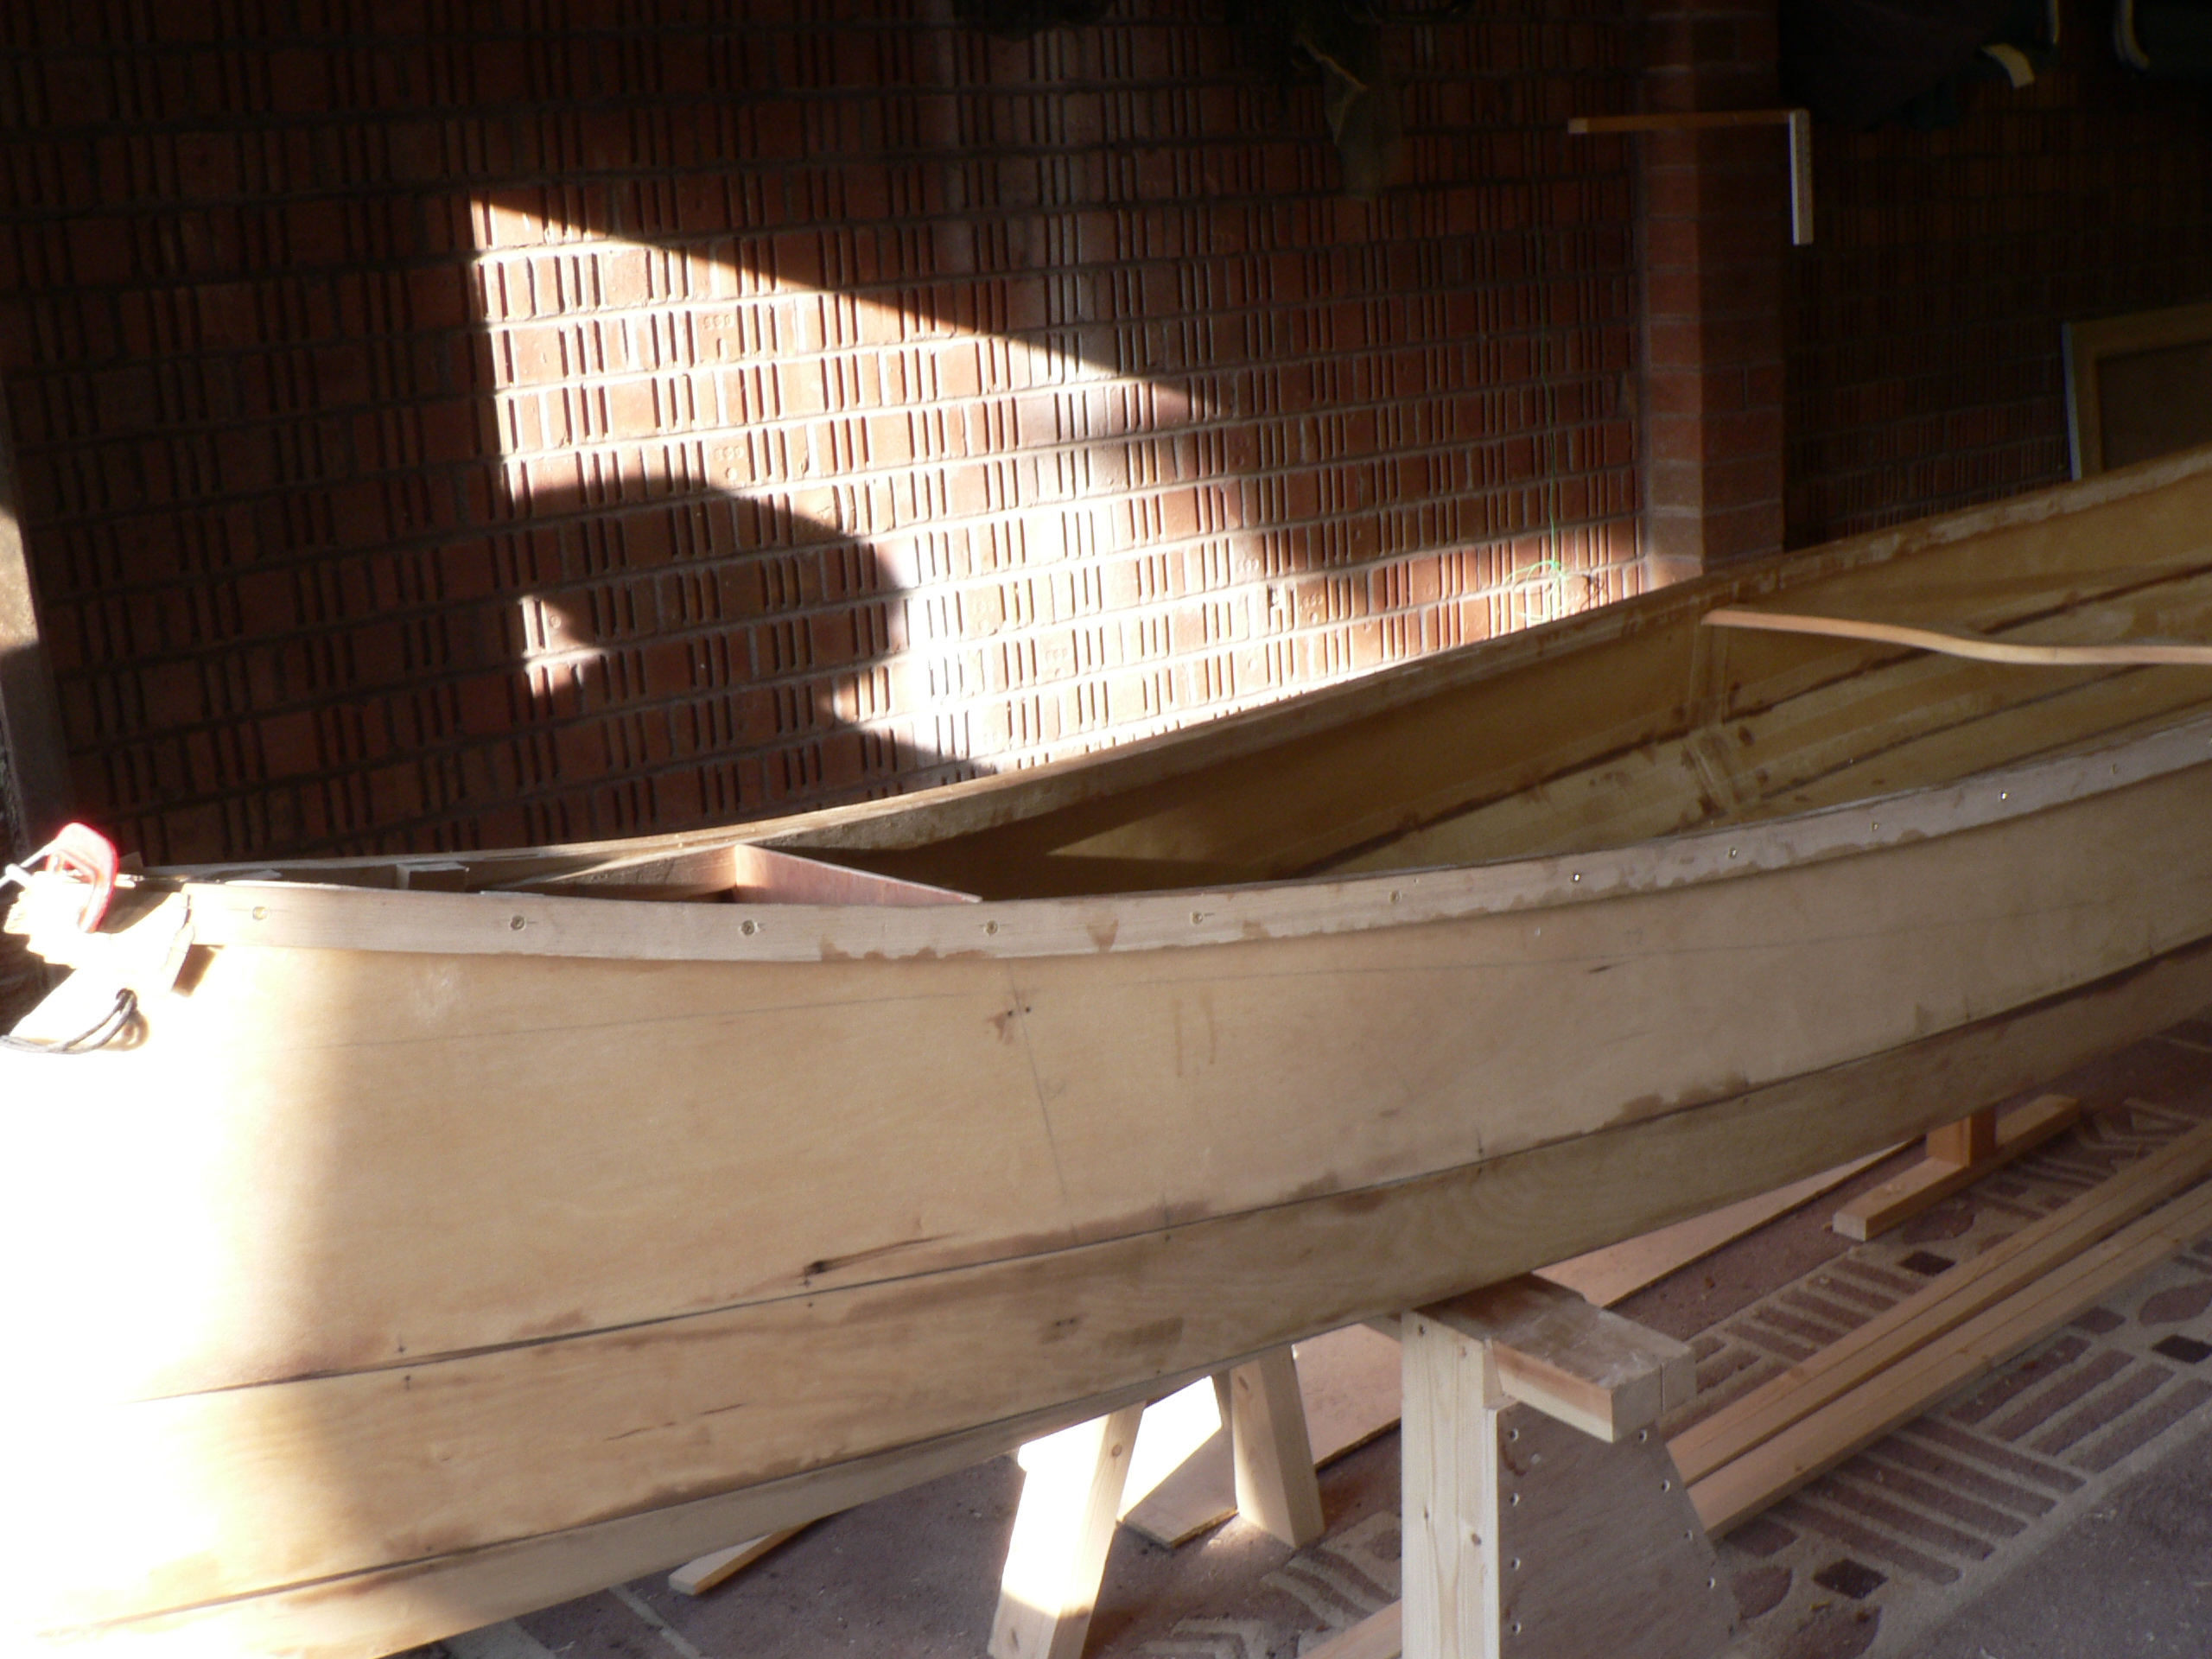 It is Starting to Look Like a Canoe | Canoeing From the beginning